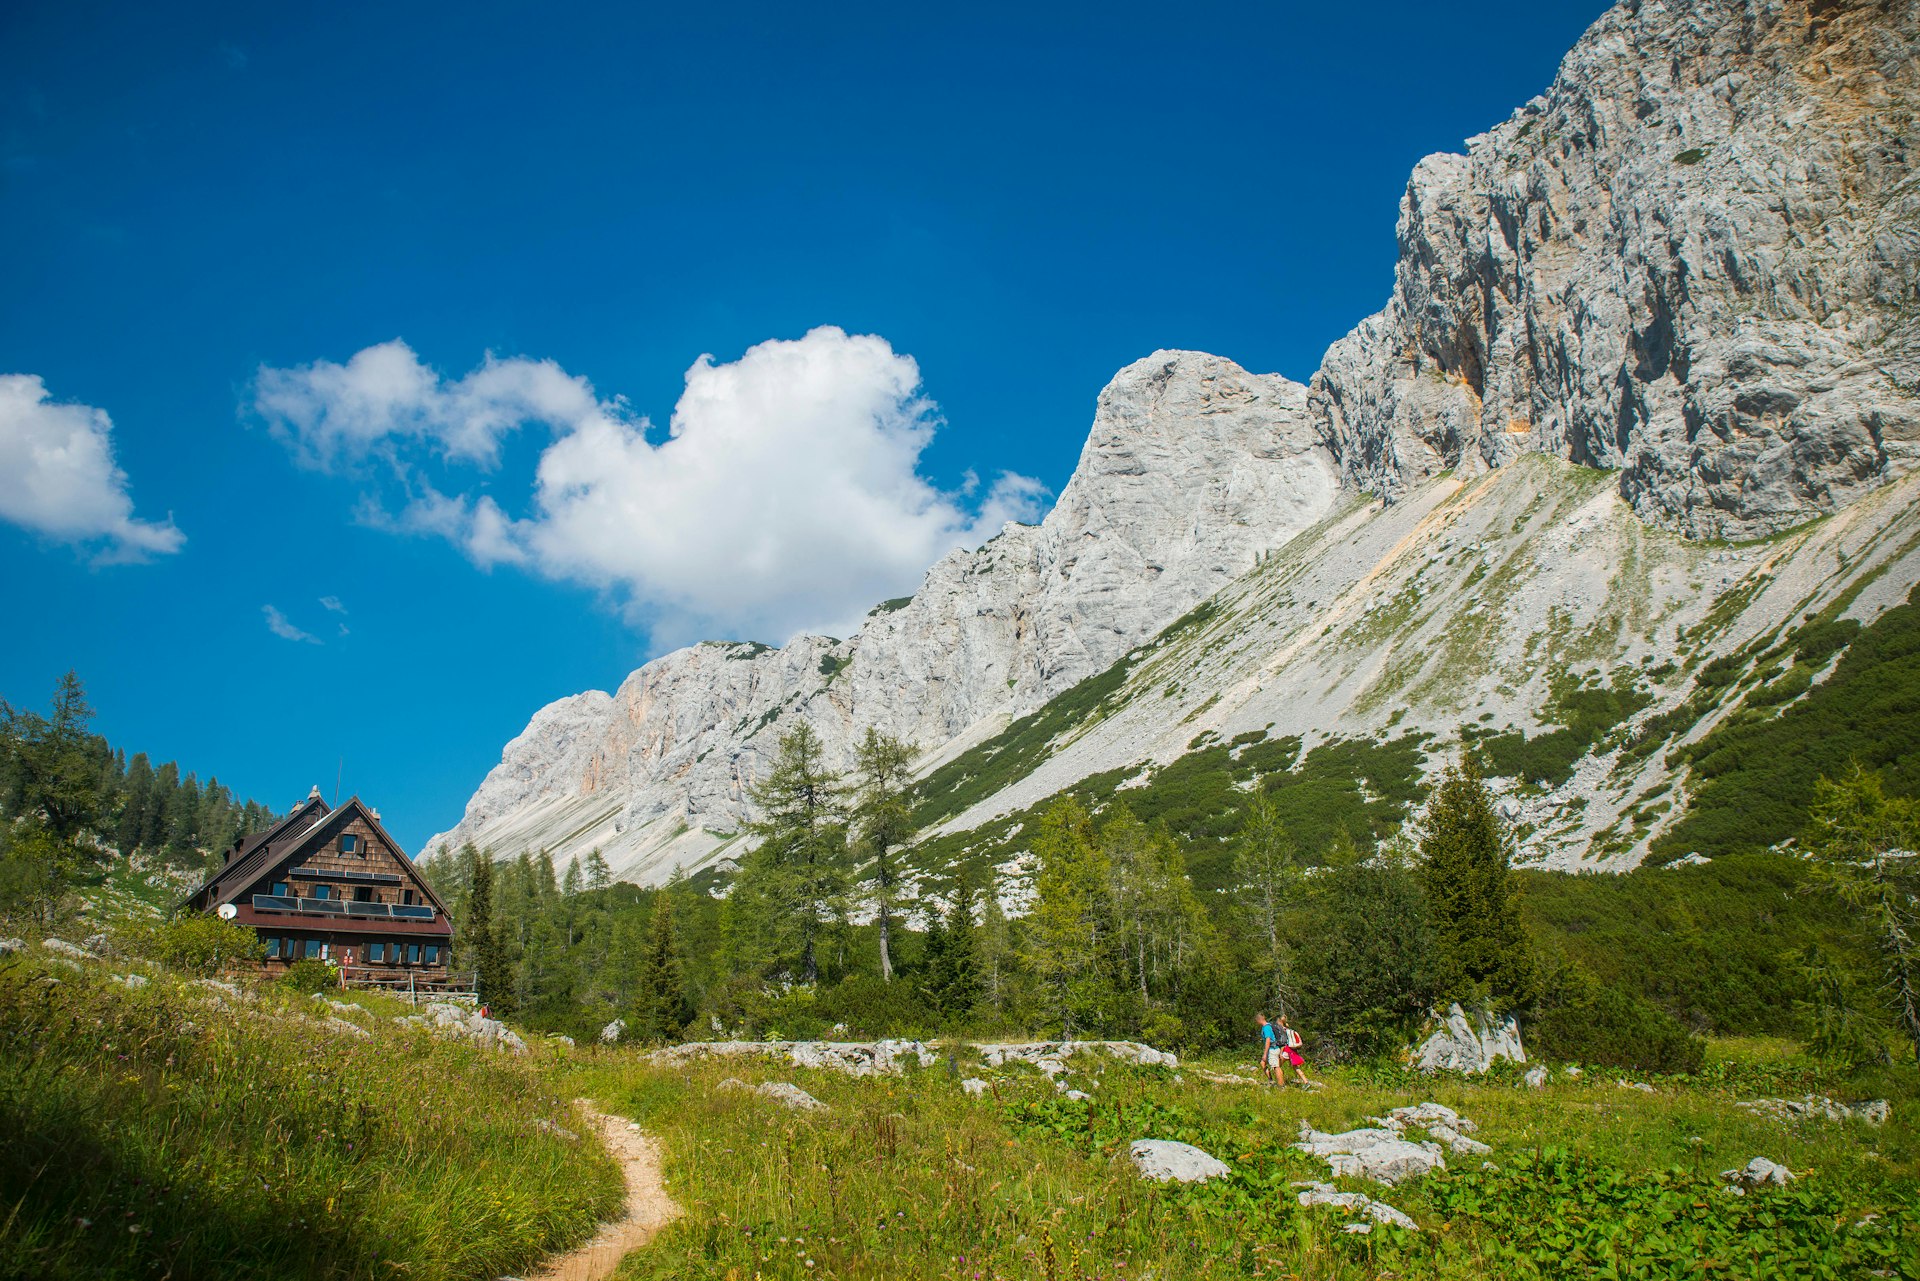 A path leading a wood cabin in Triglav National Park